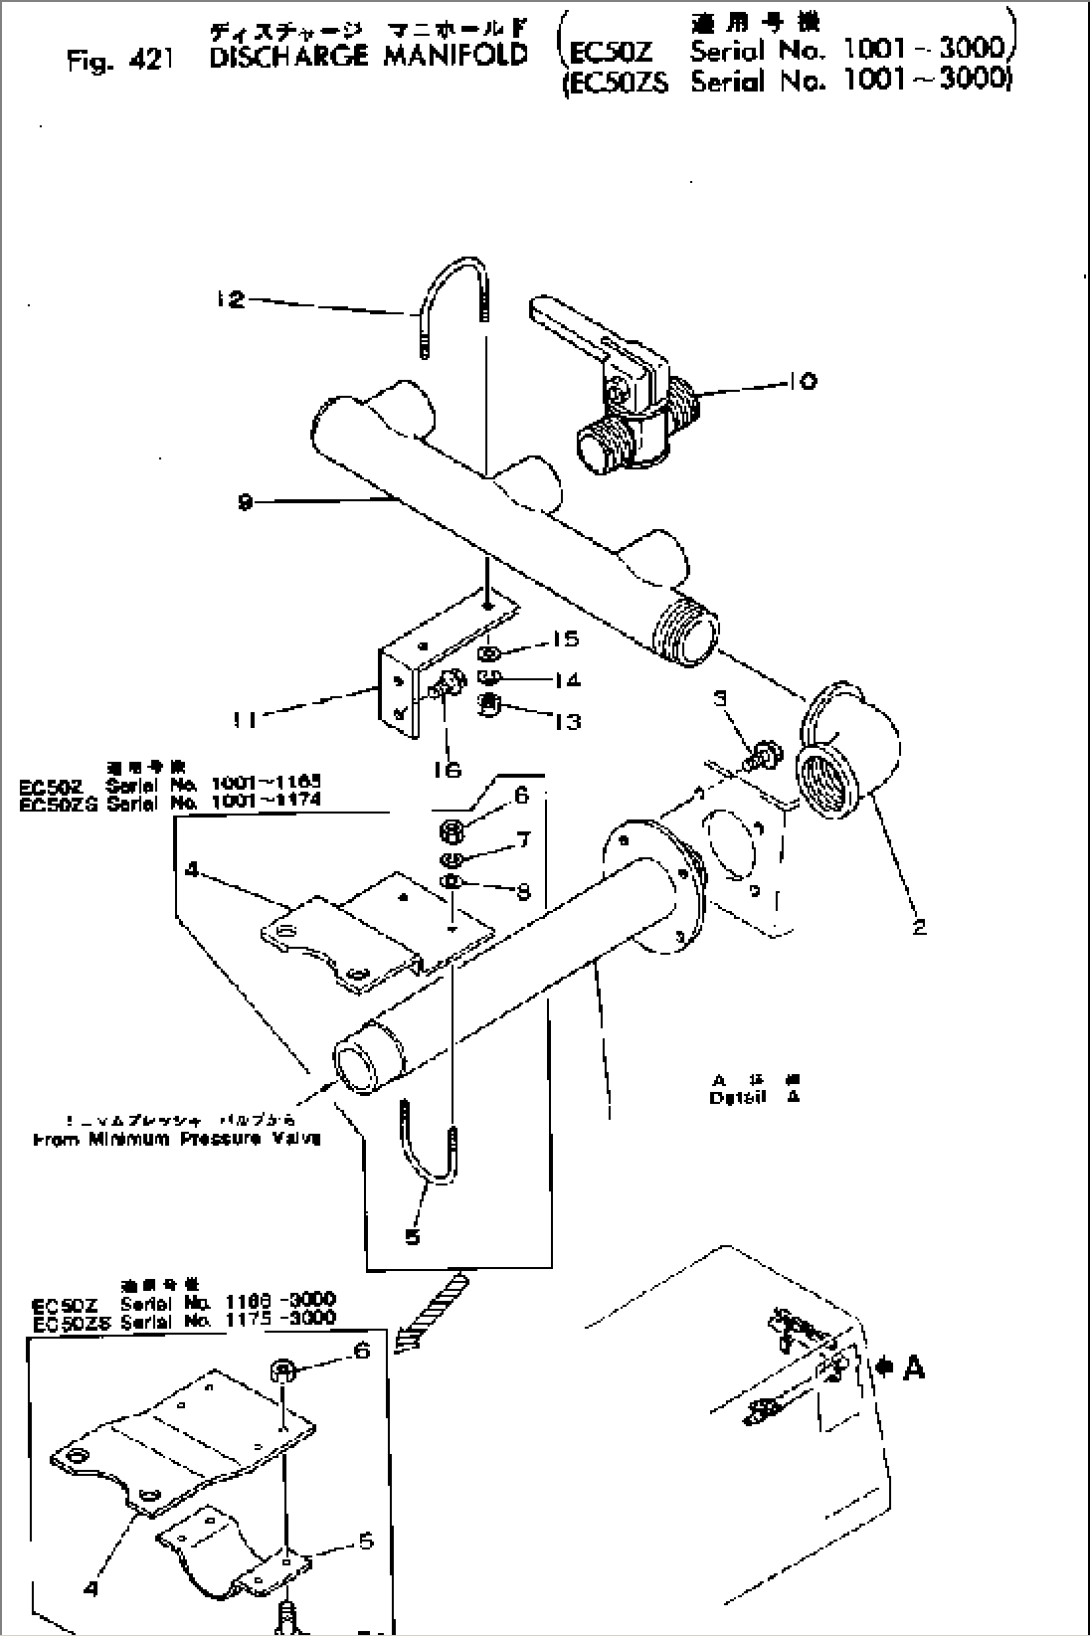 DISCHARGE MANIFOLD(#1001-3000)